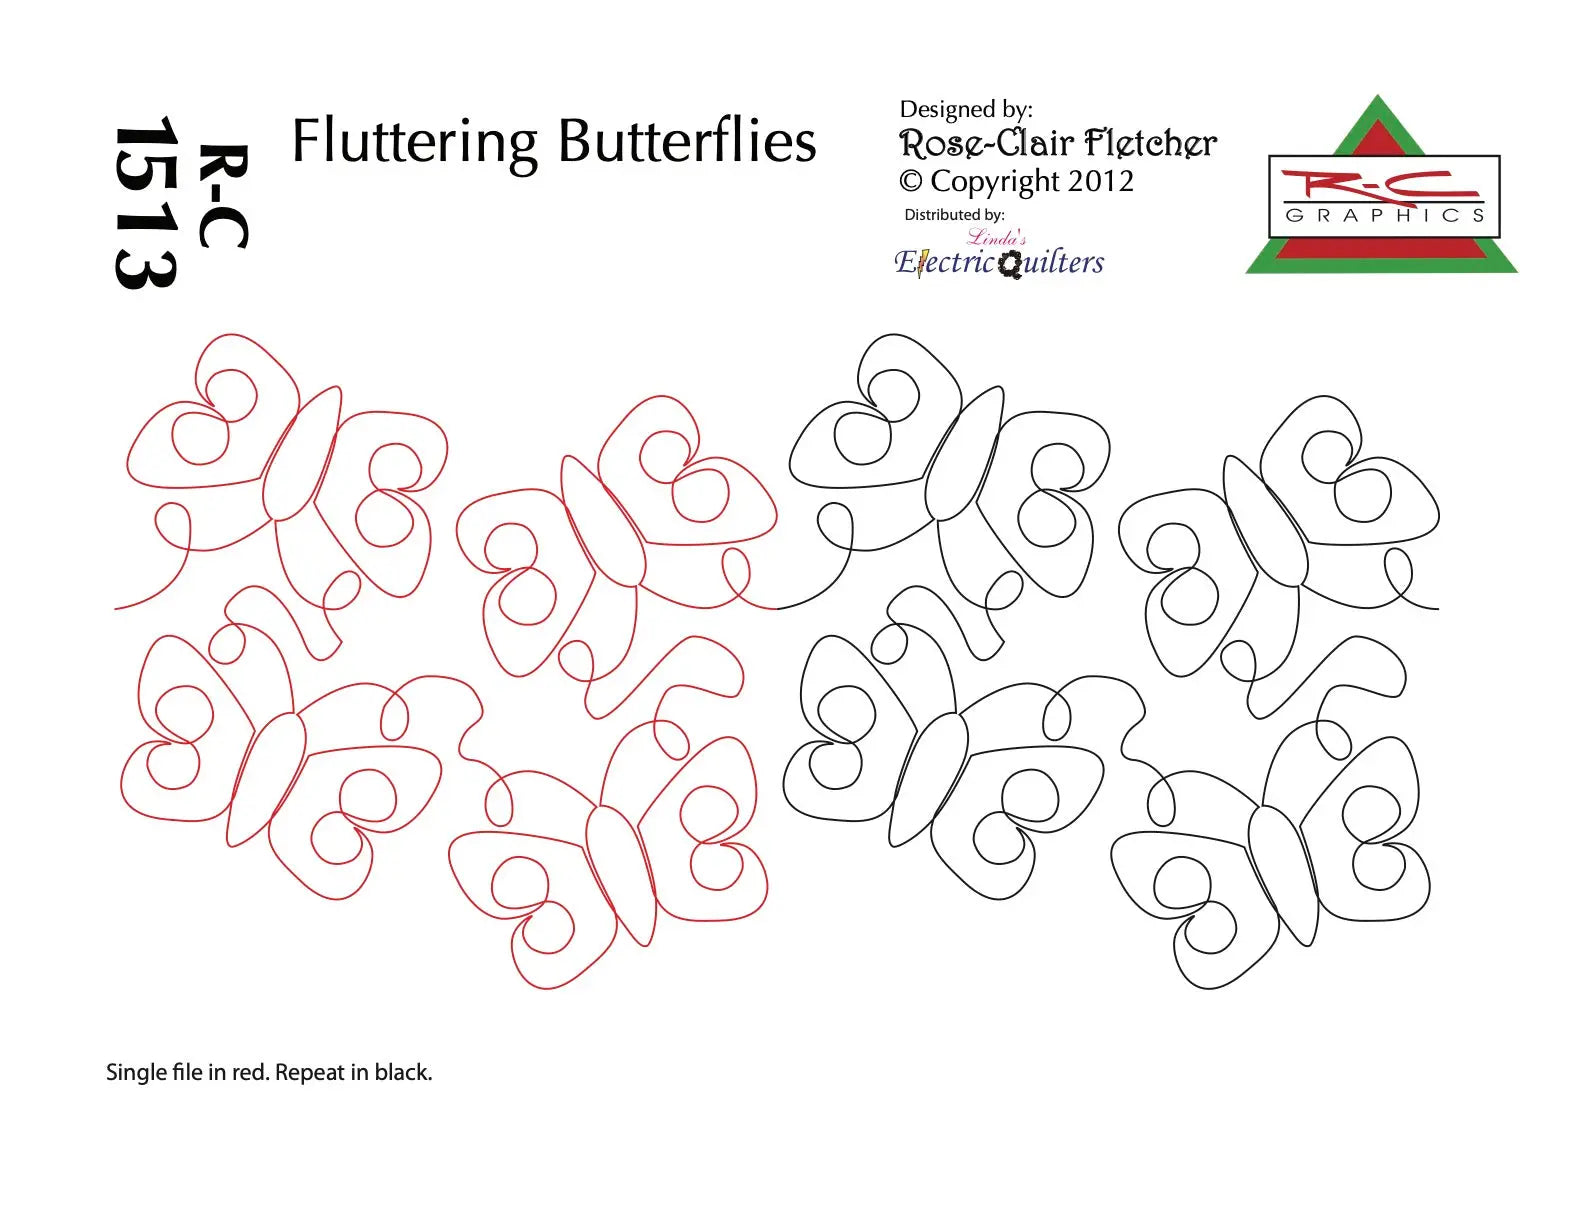 1513 Fluttering Butterflies Pantograph by Rose-Clair Fletcher - Linda's Electric Quilters